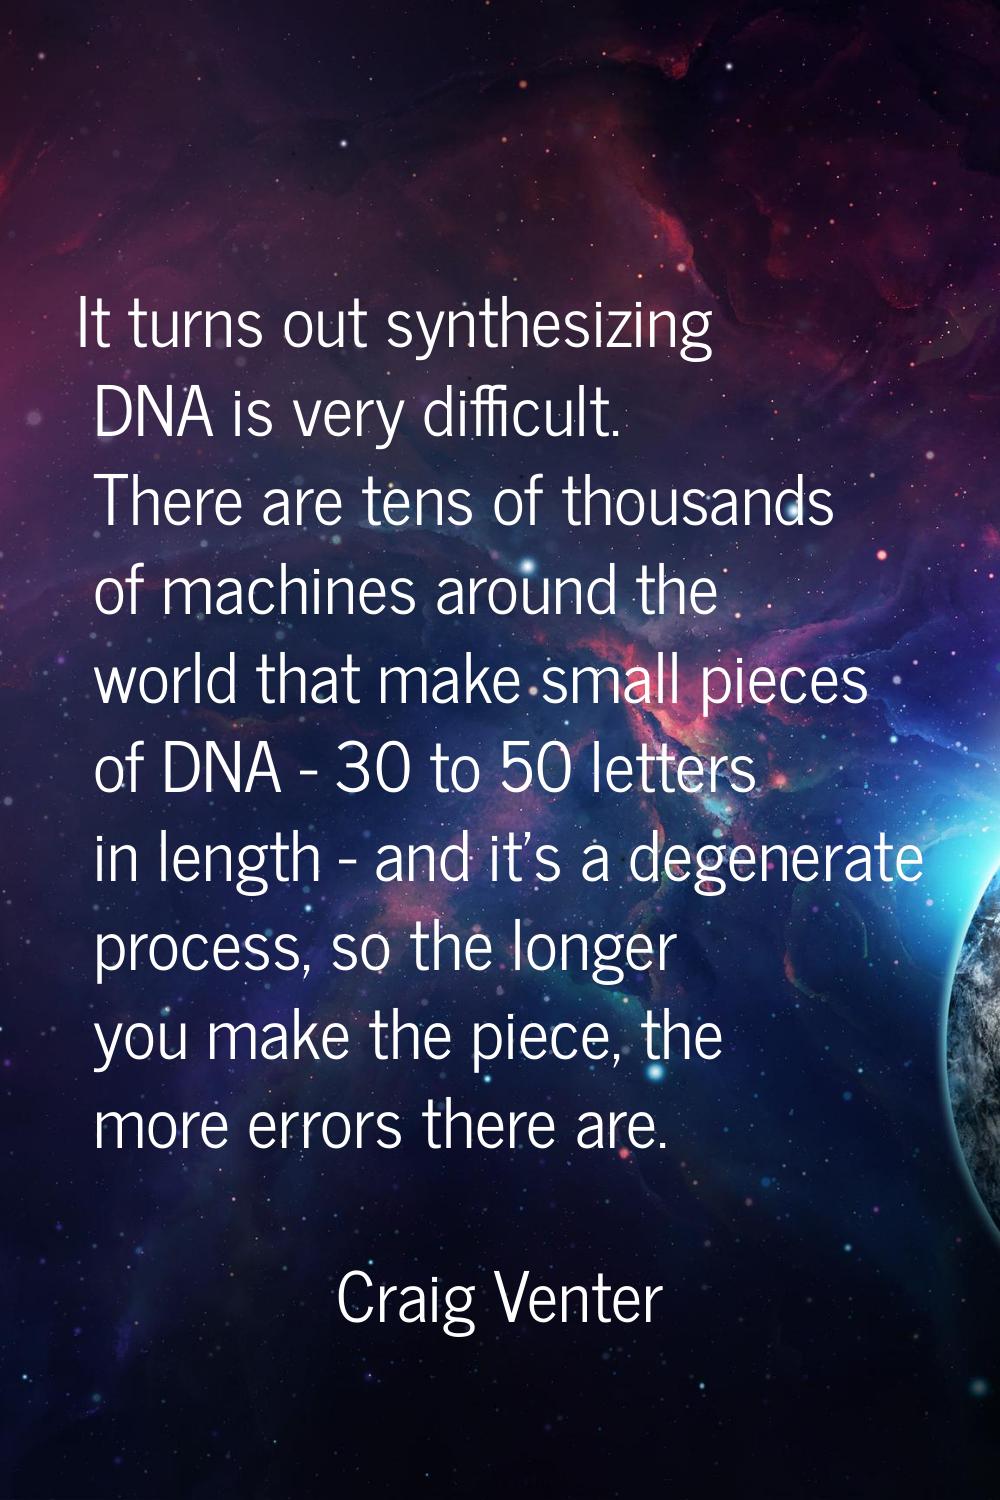 It turns out synthesizing DNA is very difficult. There are tens of thousands of machines around the